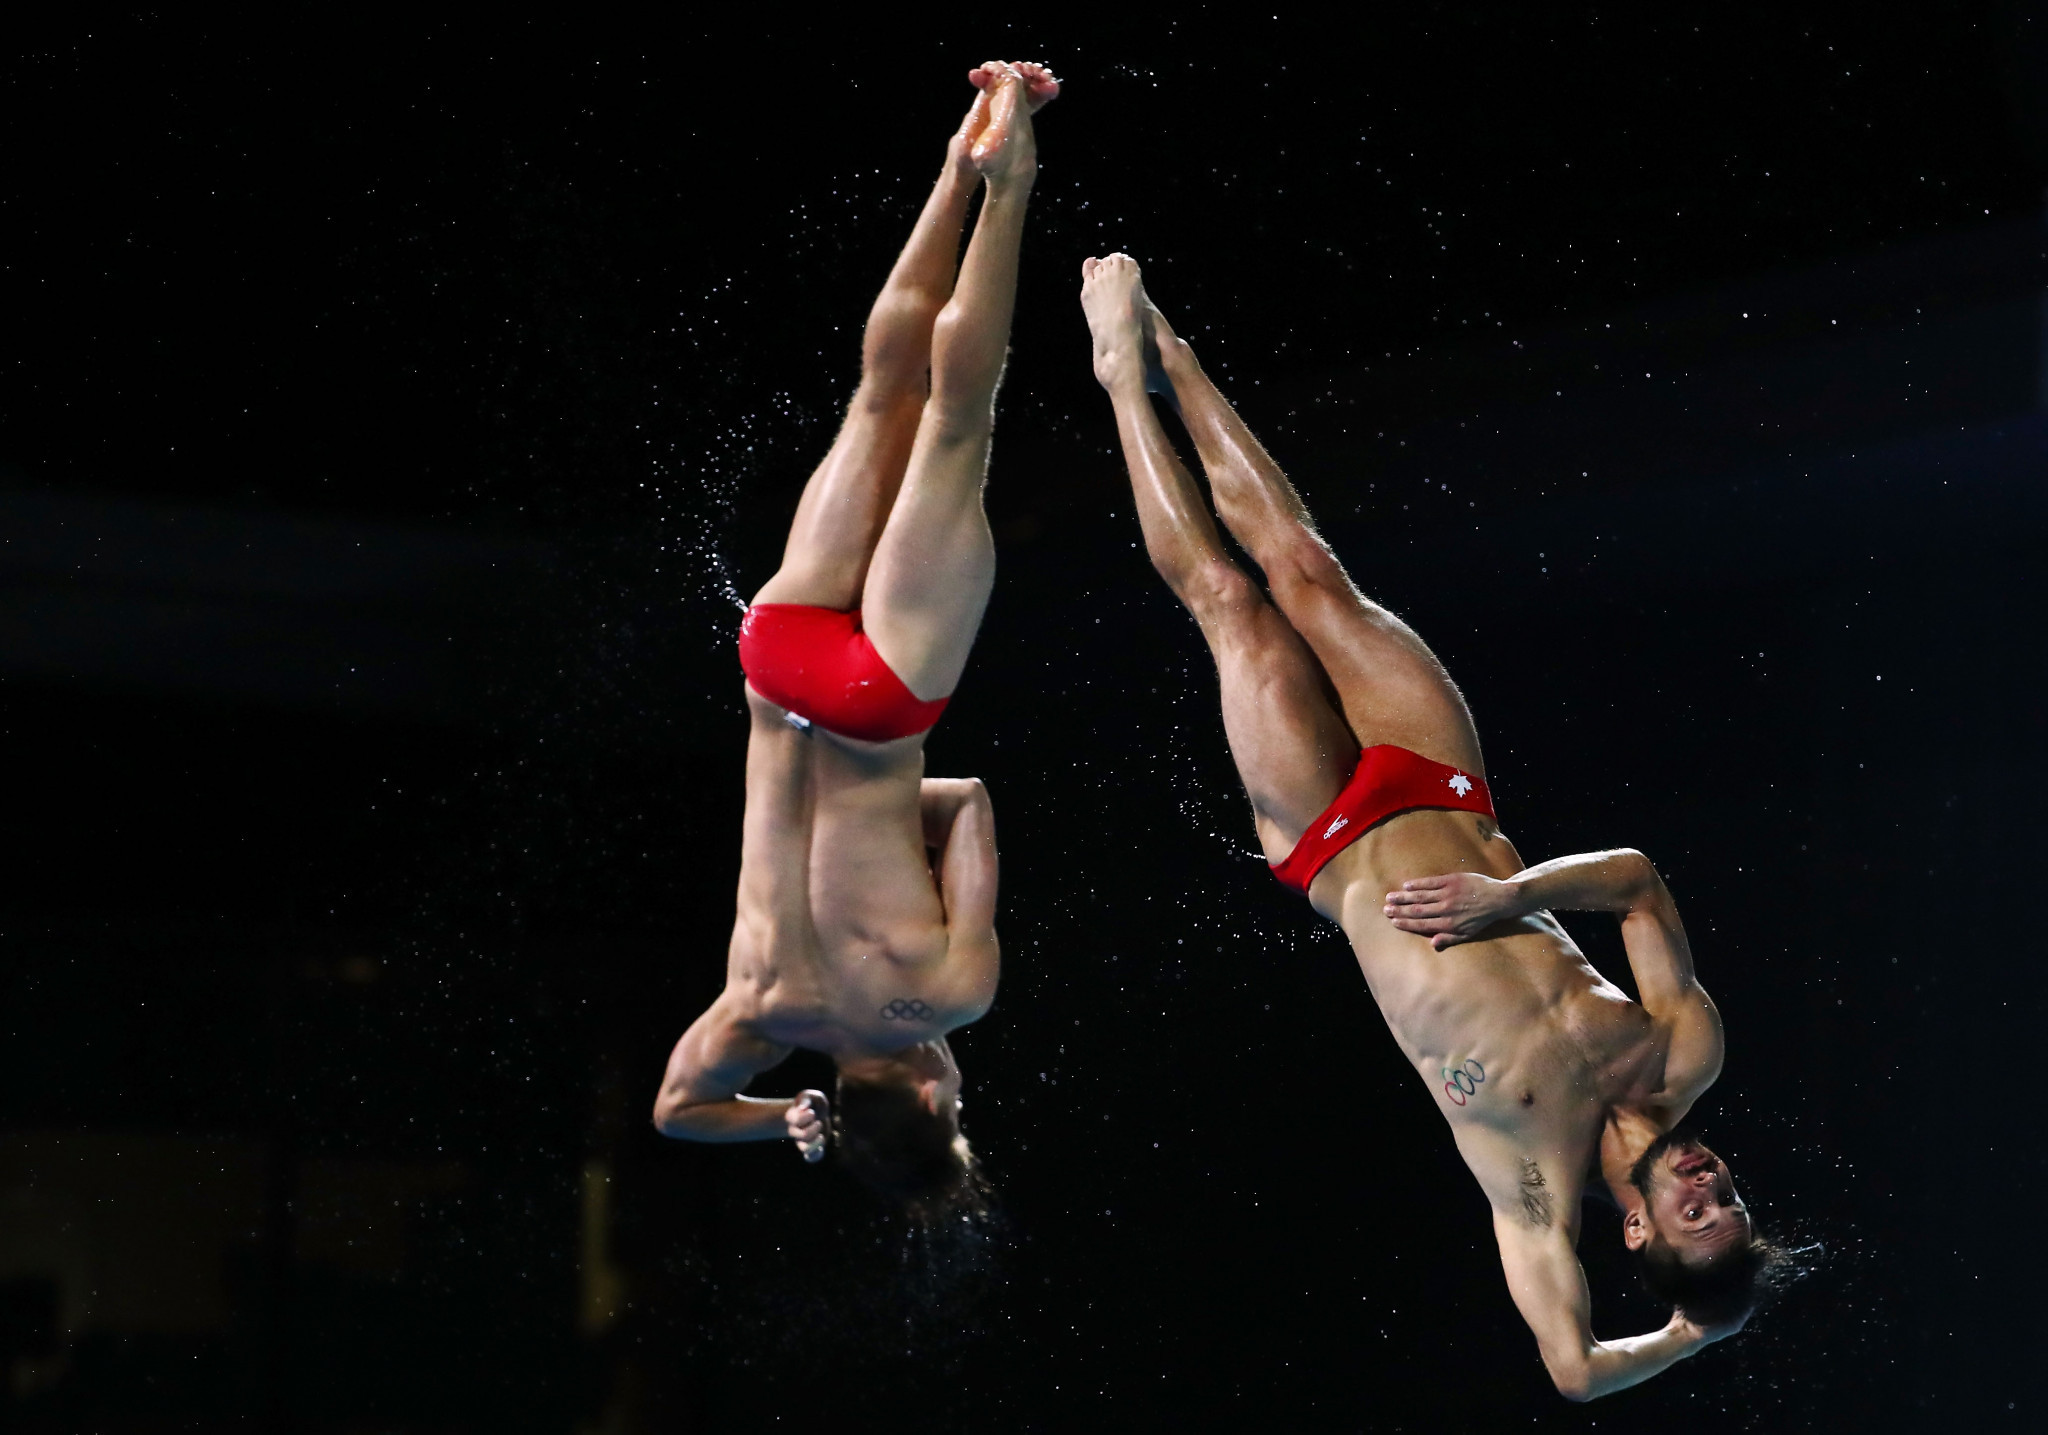 Imbeau-Dulac and Gagne win home gold at FINA Diving Grand Prix in Calgary